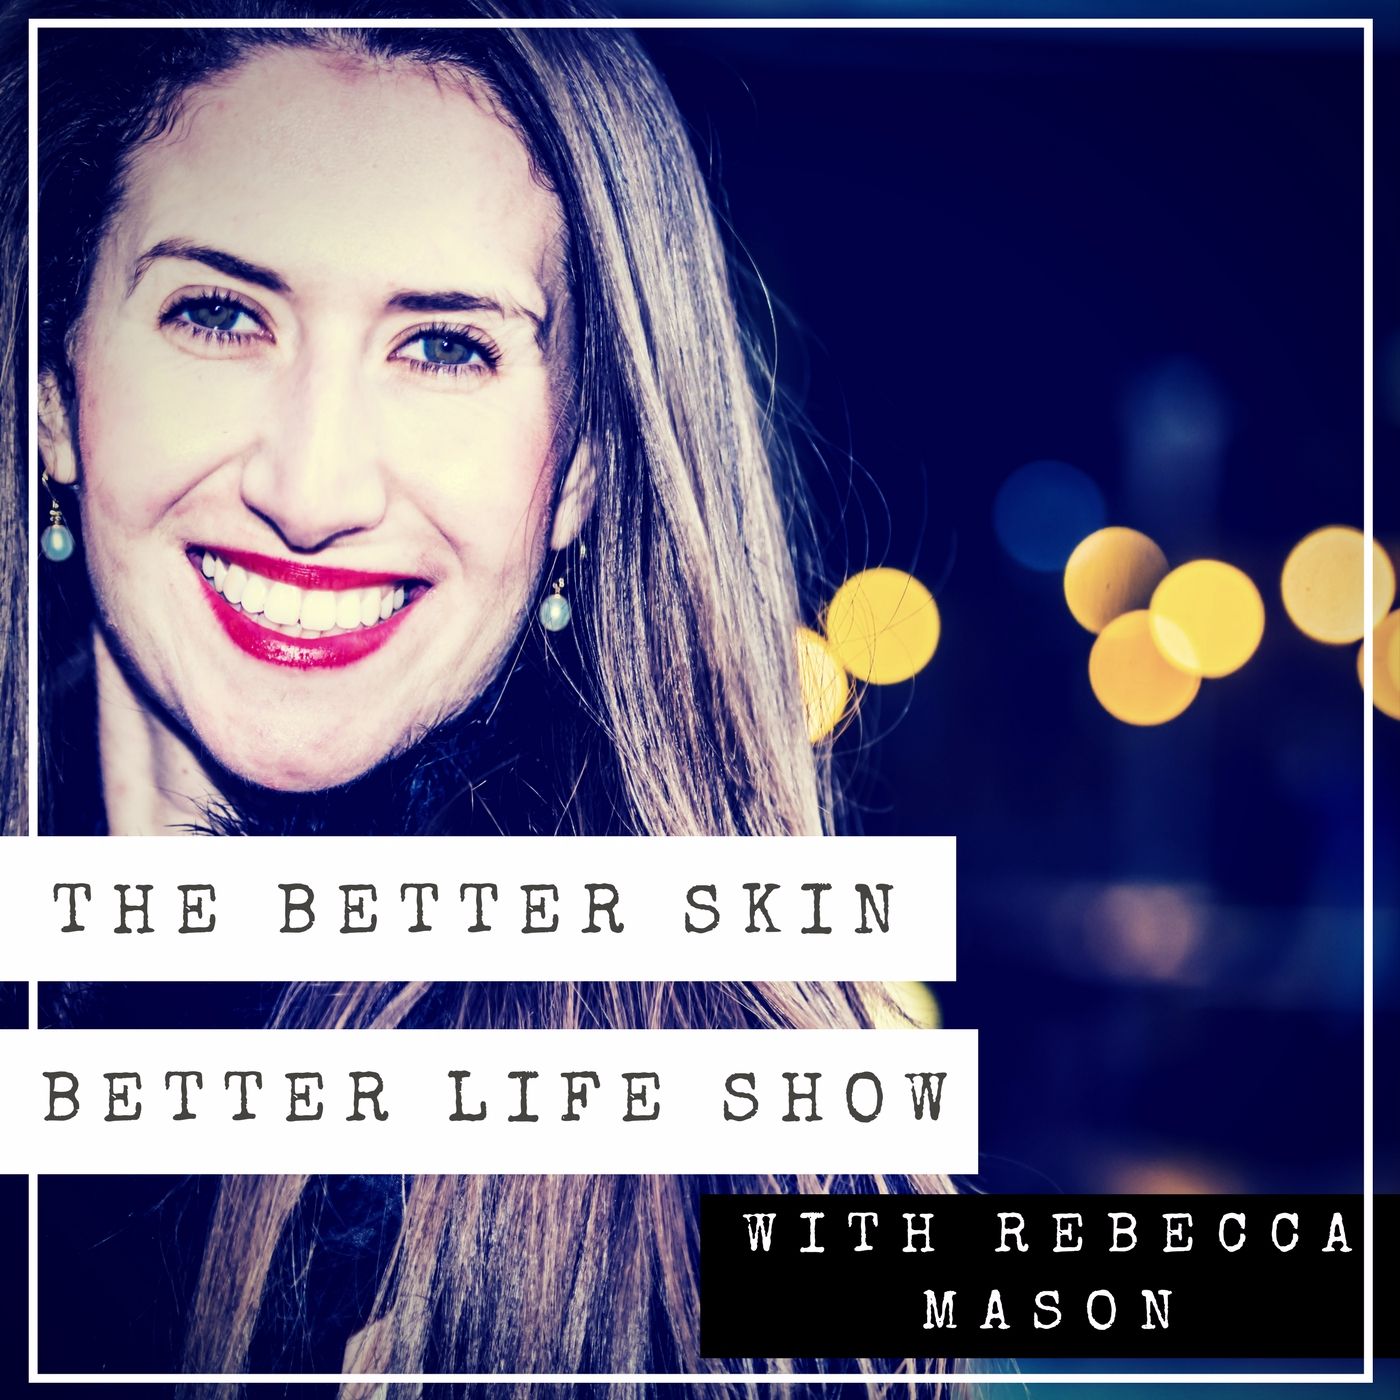 The Better Skin Better Life Show with Rebecca Mason